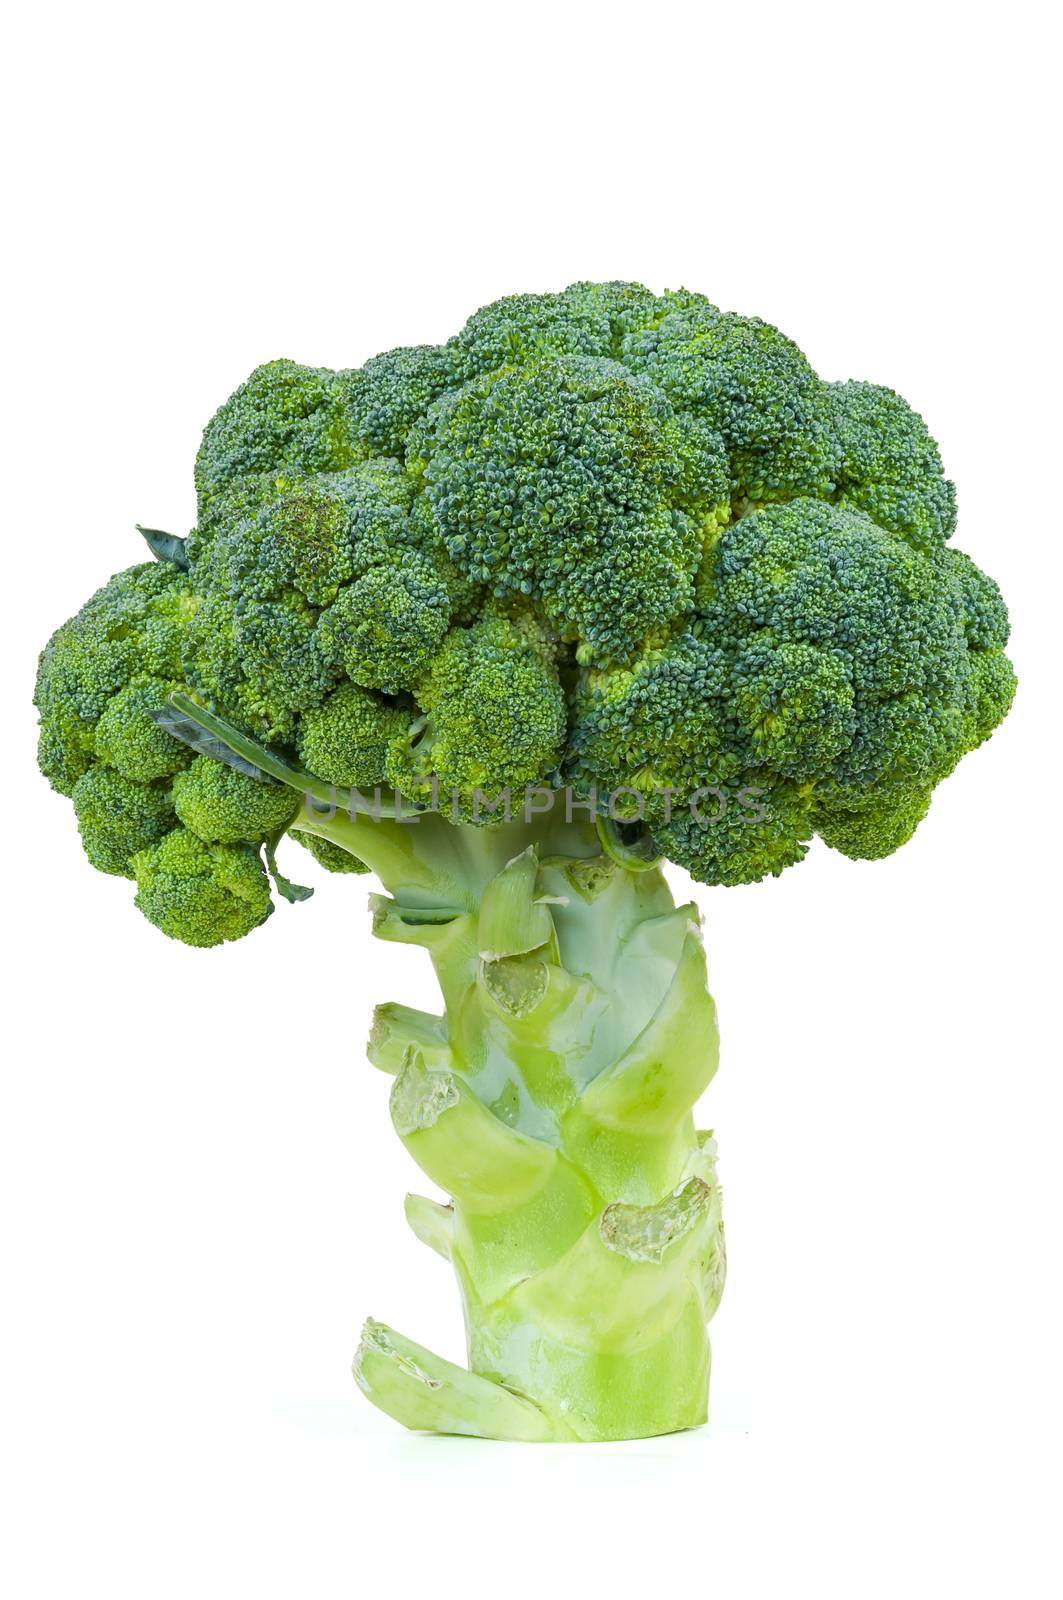 Broccoli cut out on white background by mkos83